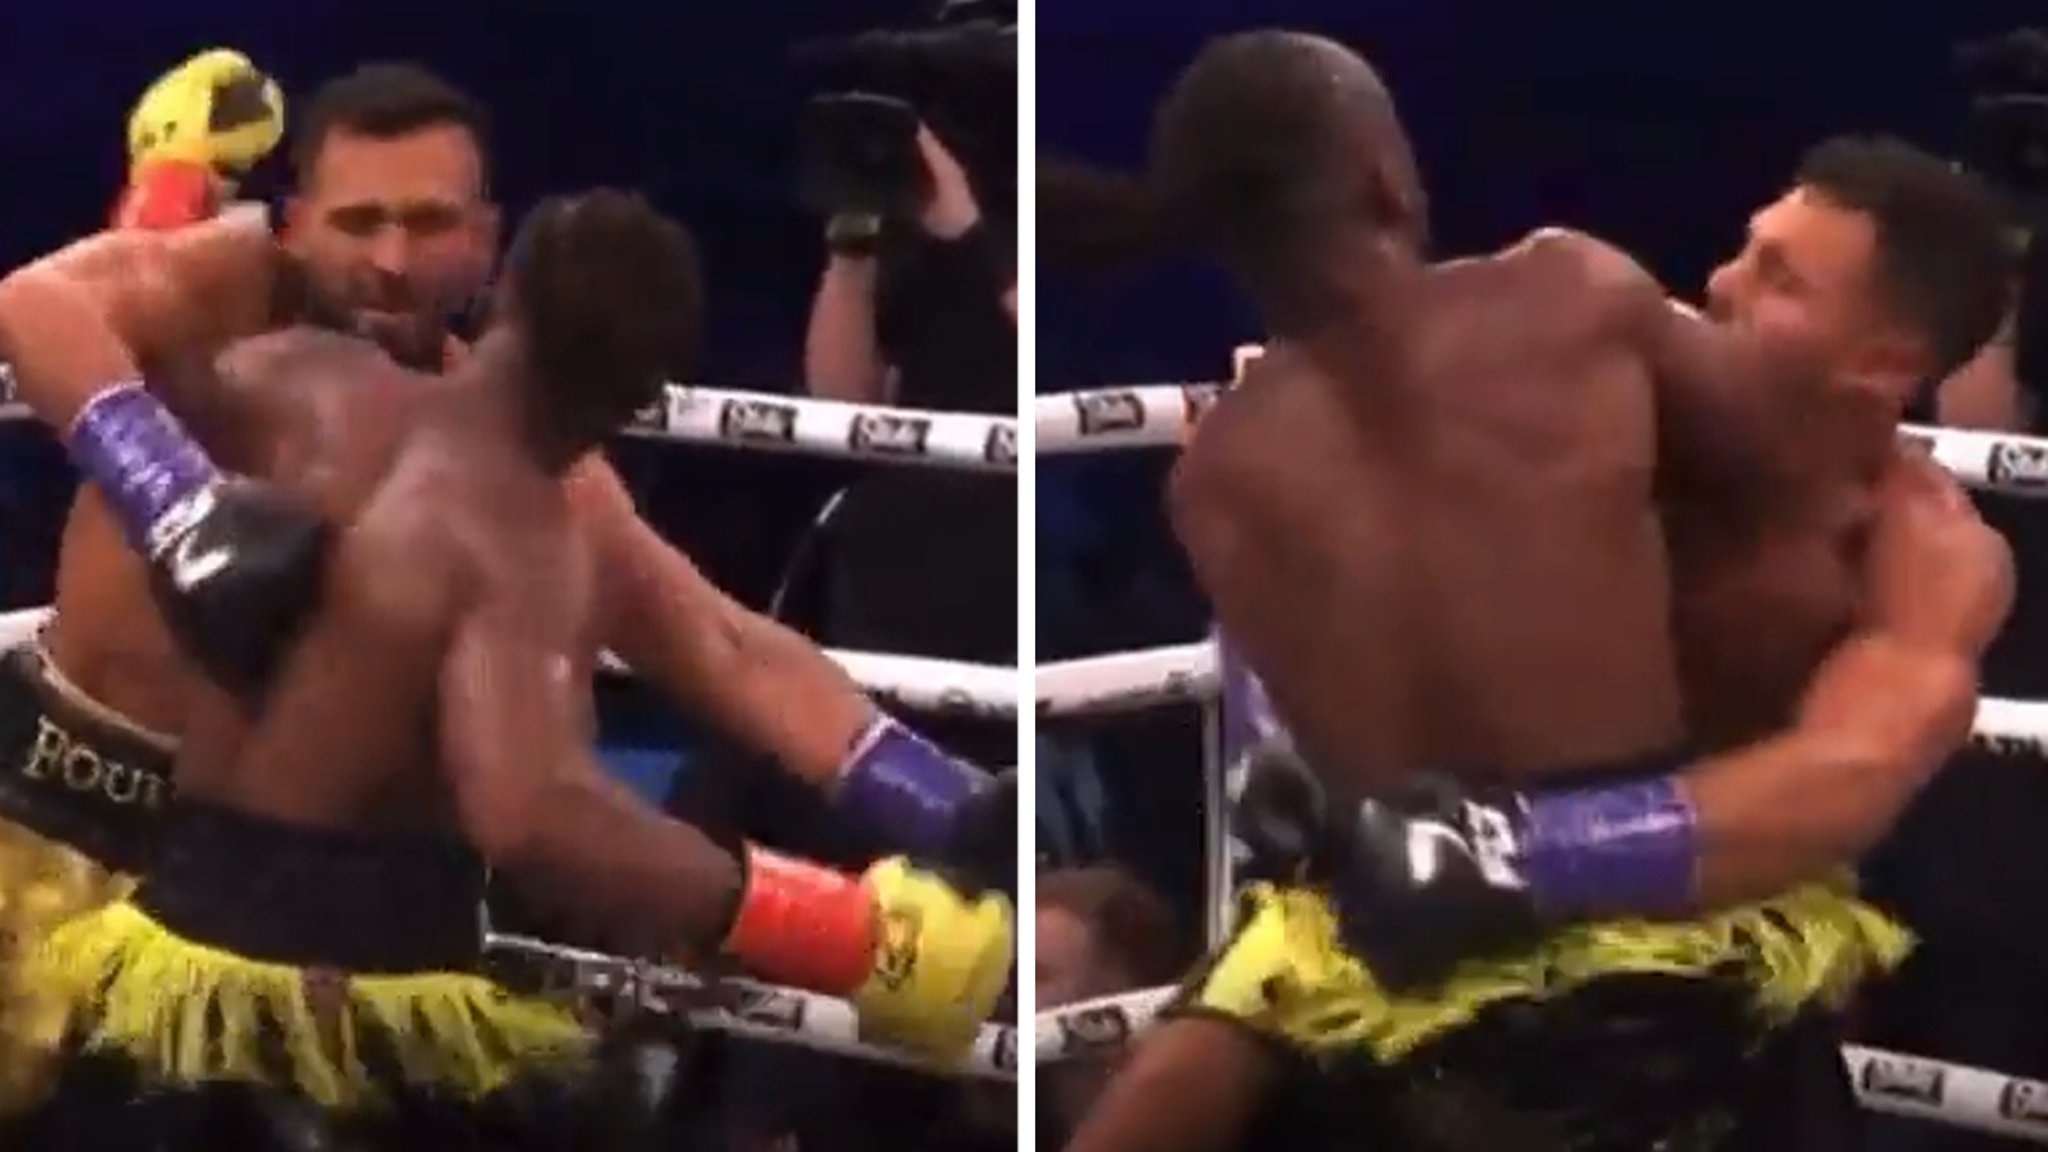 KSI KOs Fournier With Illegal Elbow Blow to Face that Referee Didn't See